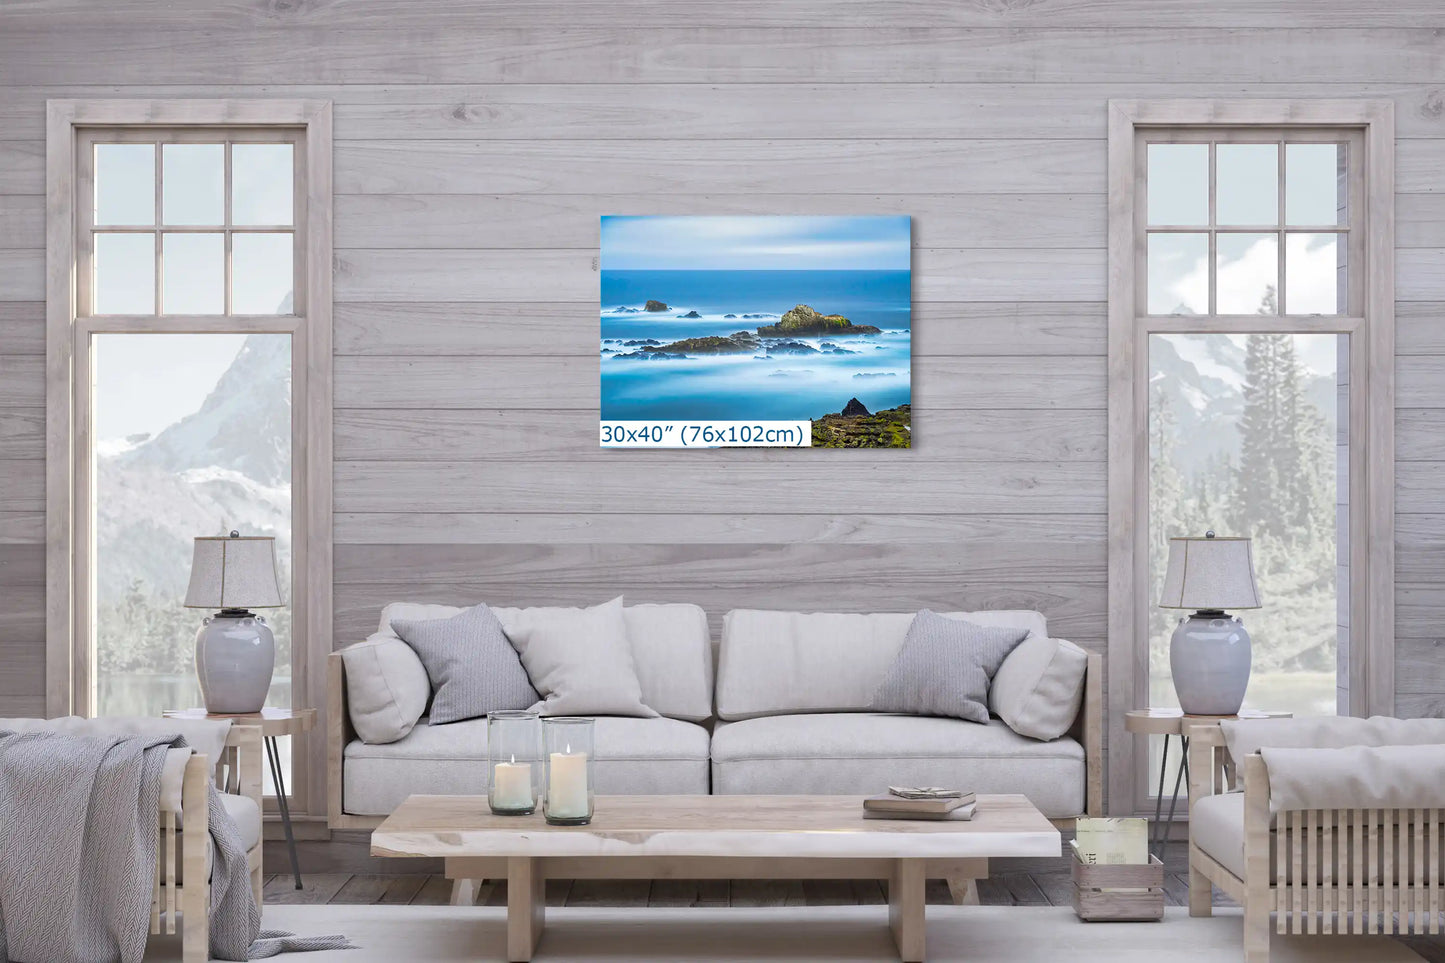 Large 30"x40" canvas of Point Lobos ocean scene centers over a sofa, anchoring the living space with coastal serenity.